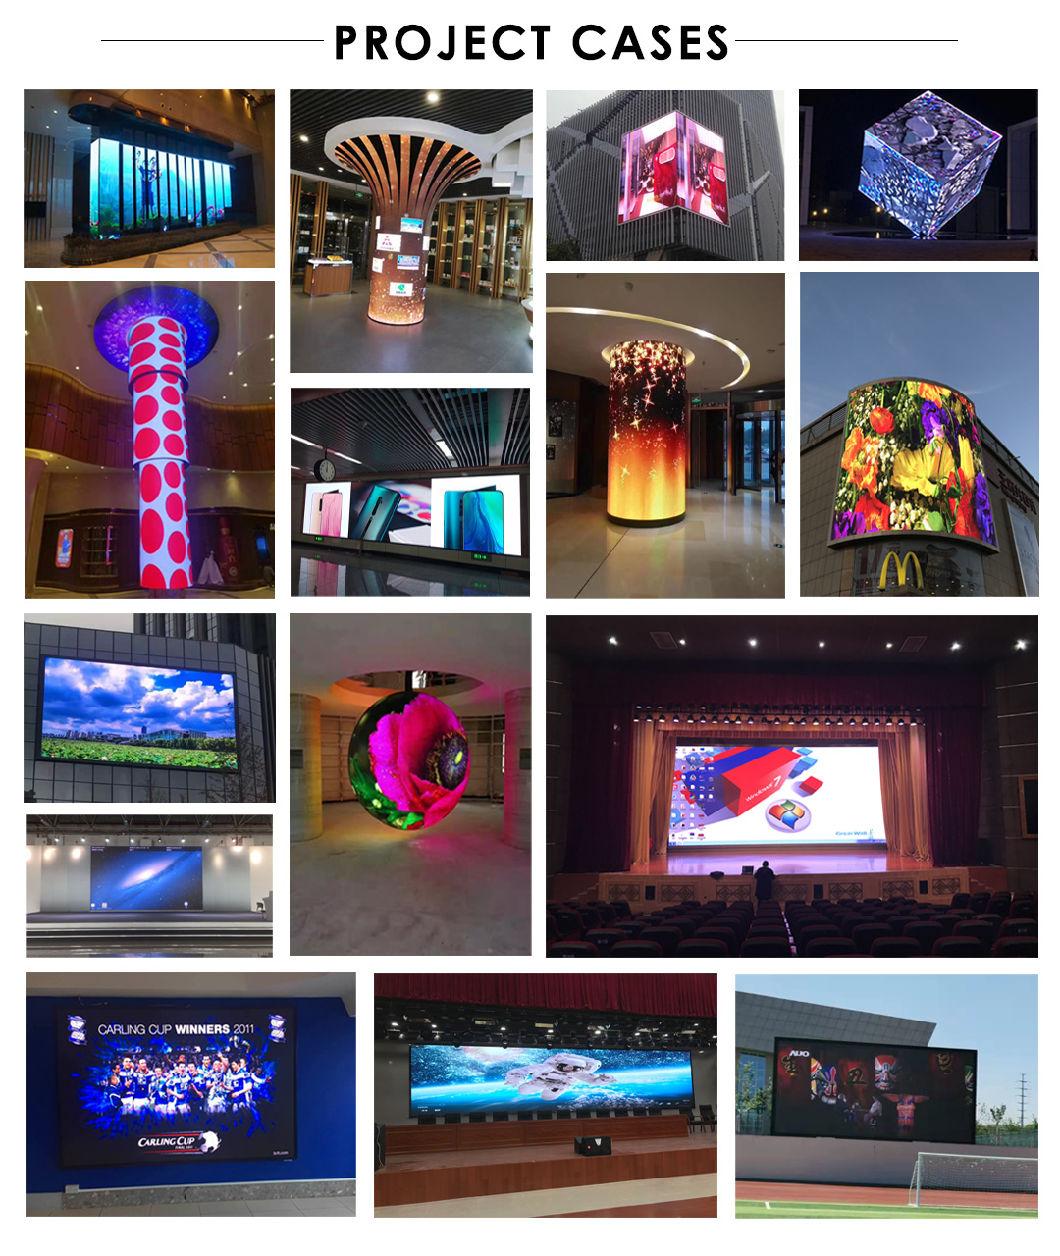 Indoor Full Color LED Display P5 Definition Video Screen Wall